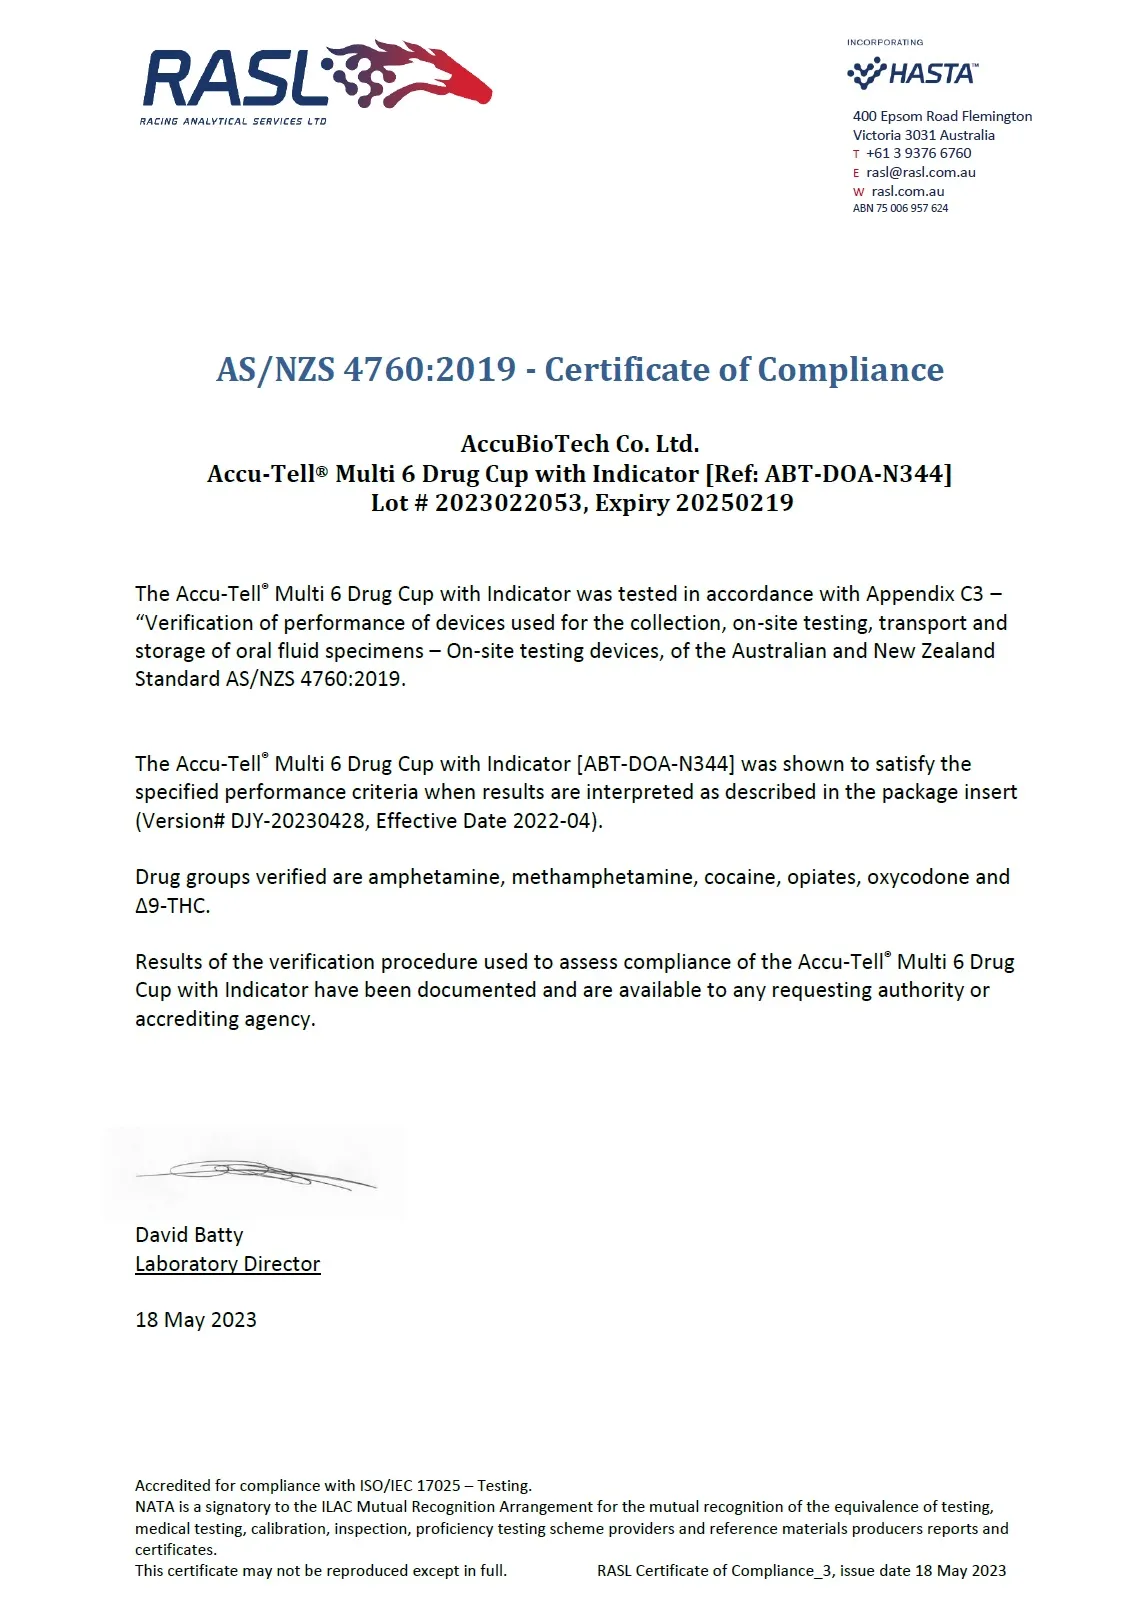 Accu-Tell® Multi-6/8 Drug Cup for Saliva Samples verified and comply with AS/NZS 4760:2019